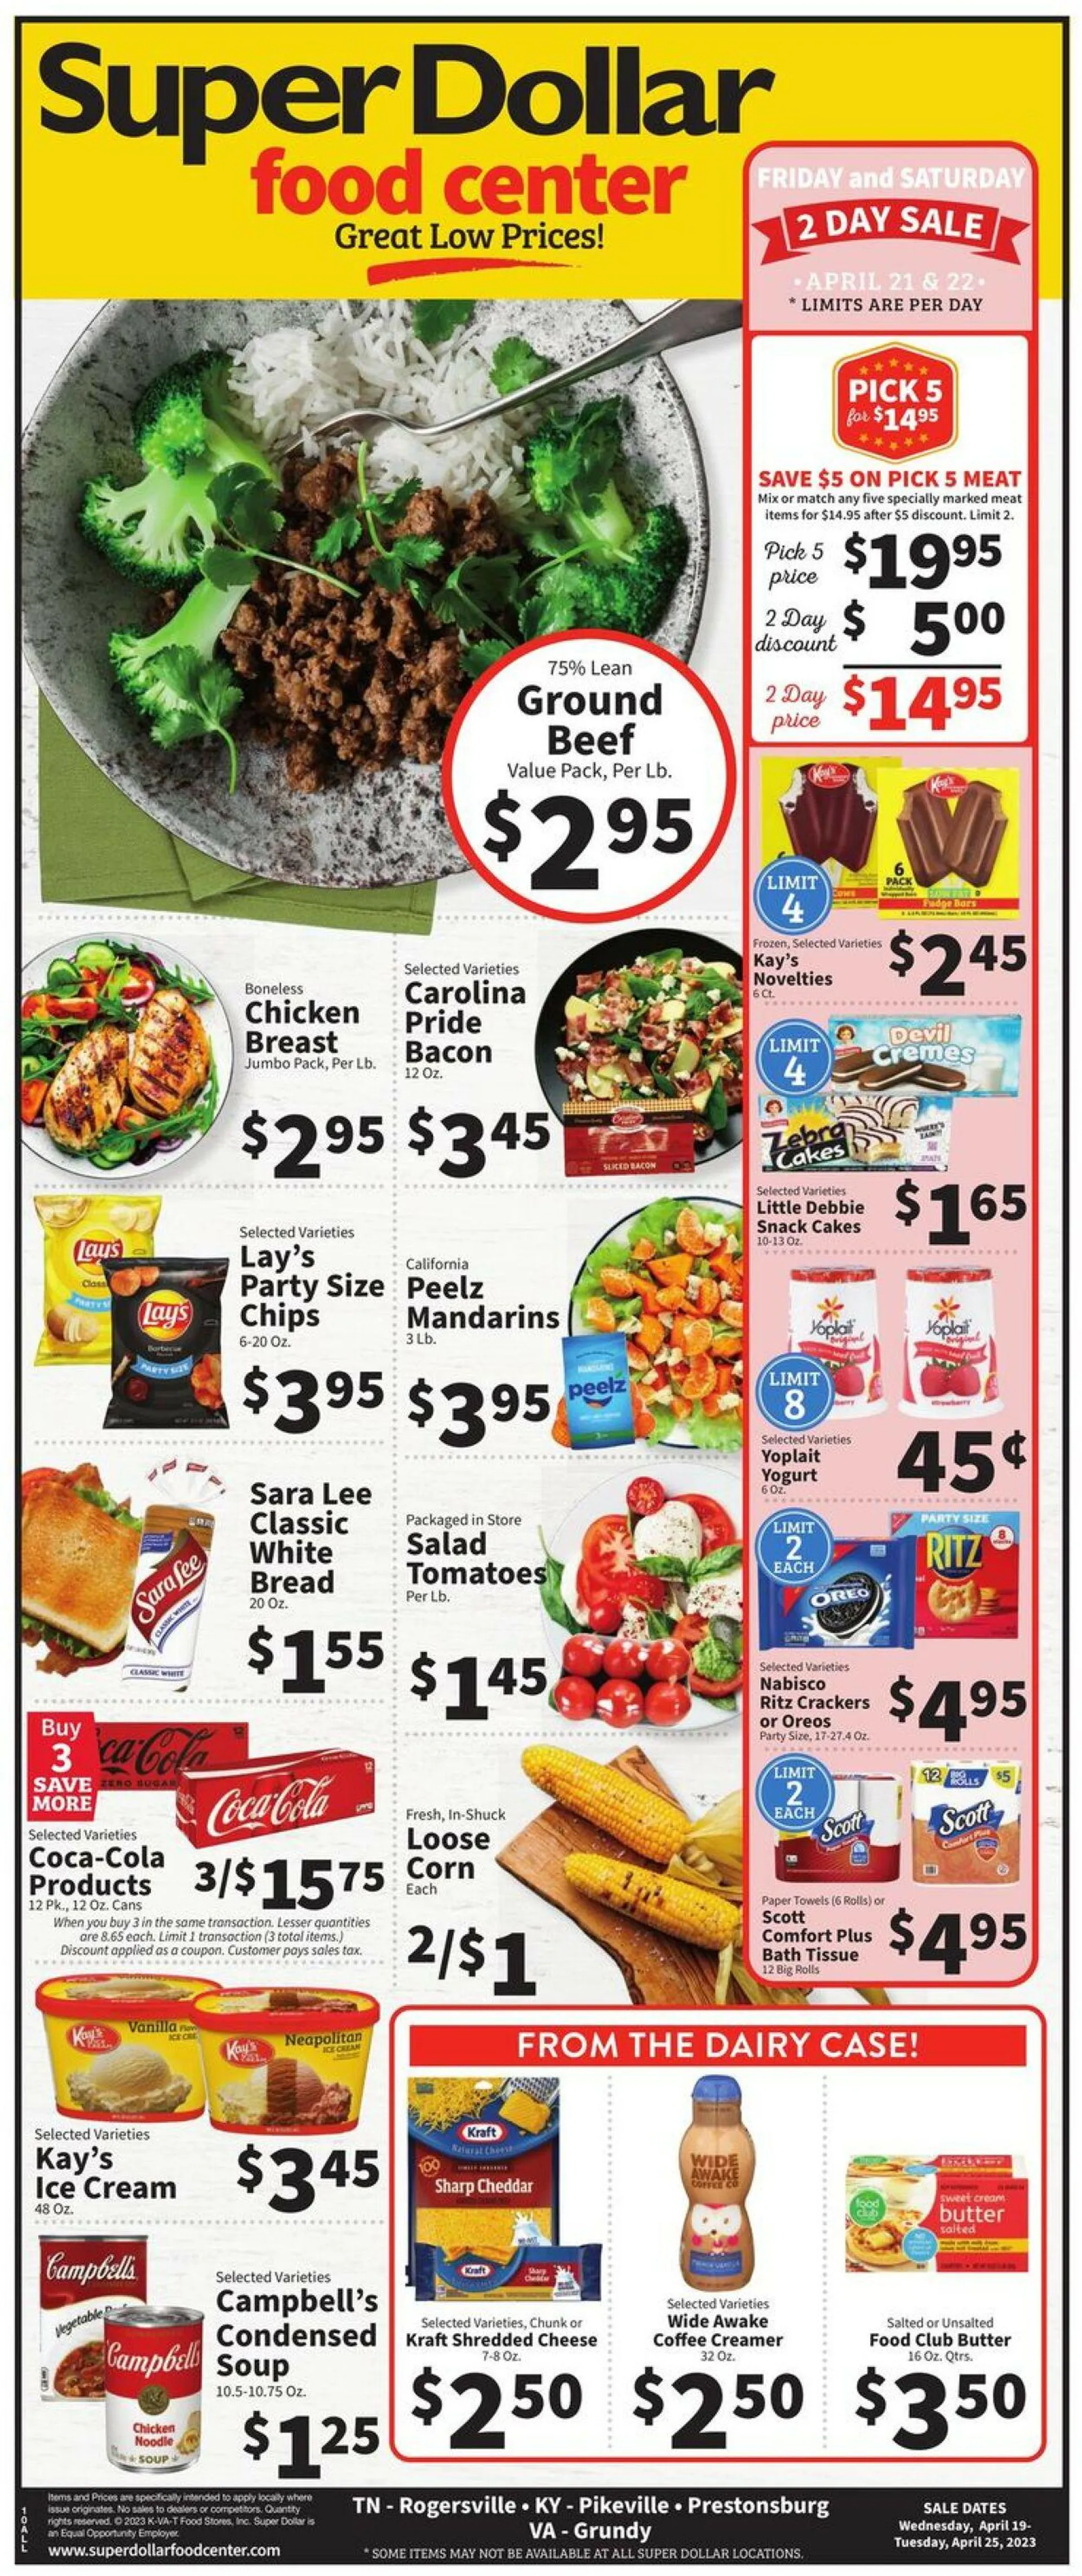 Super Dollar Food Center Current weekly ad - 1